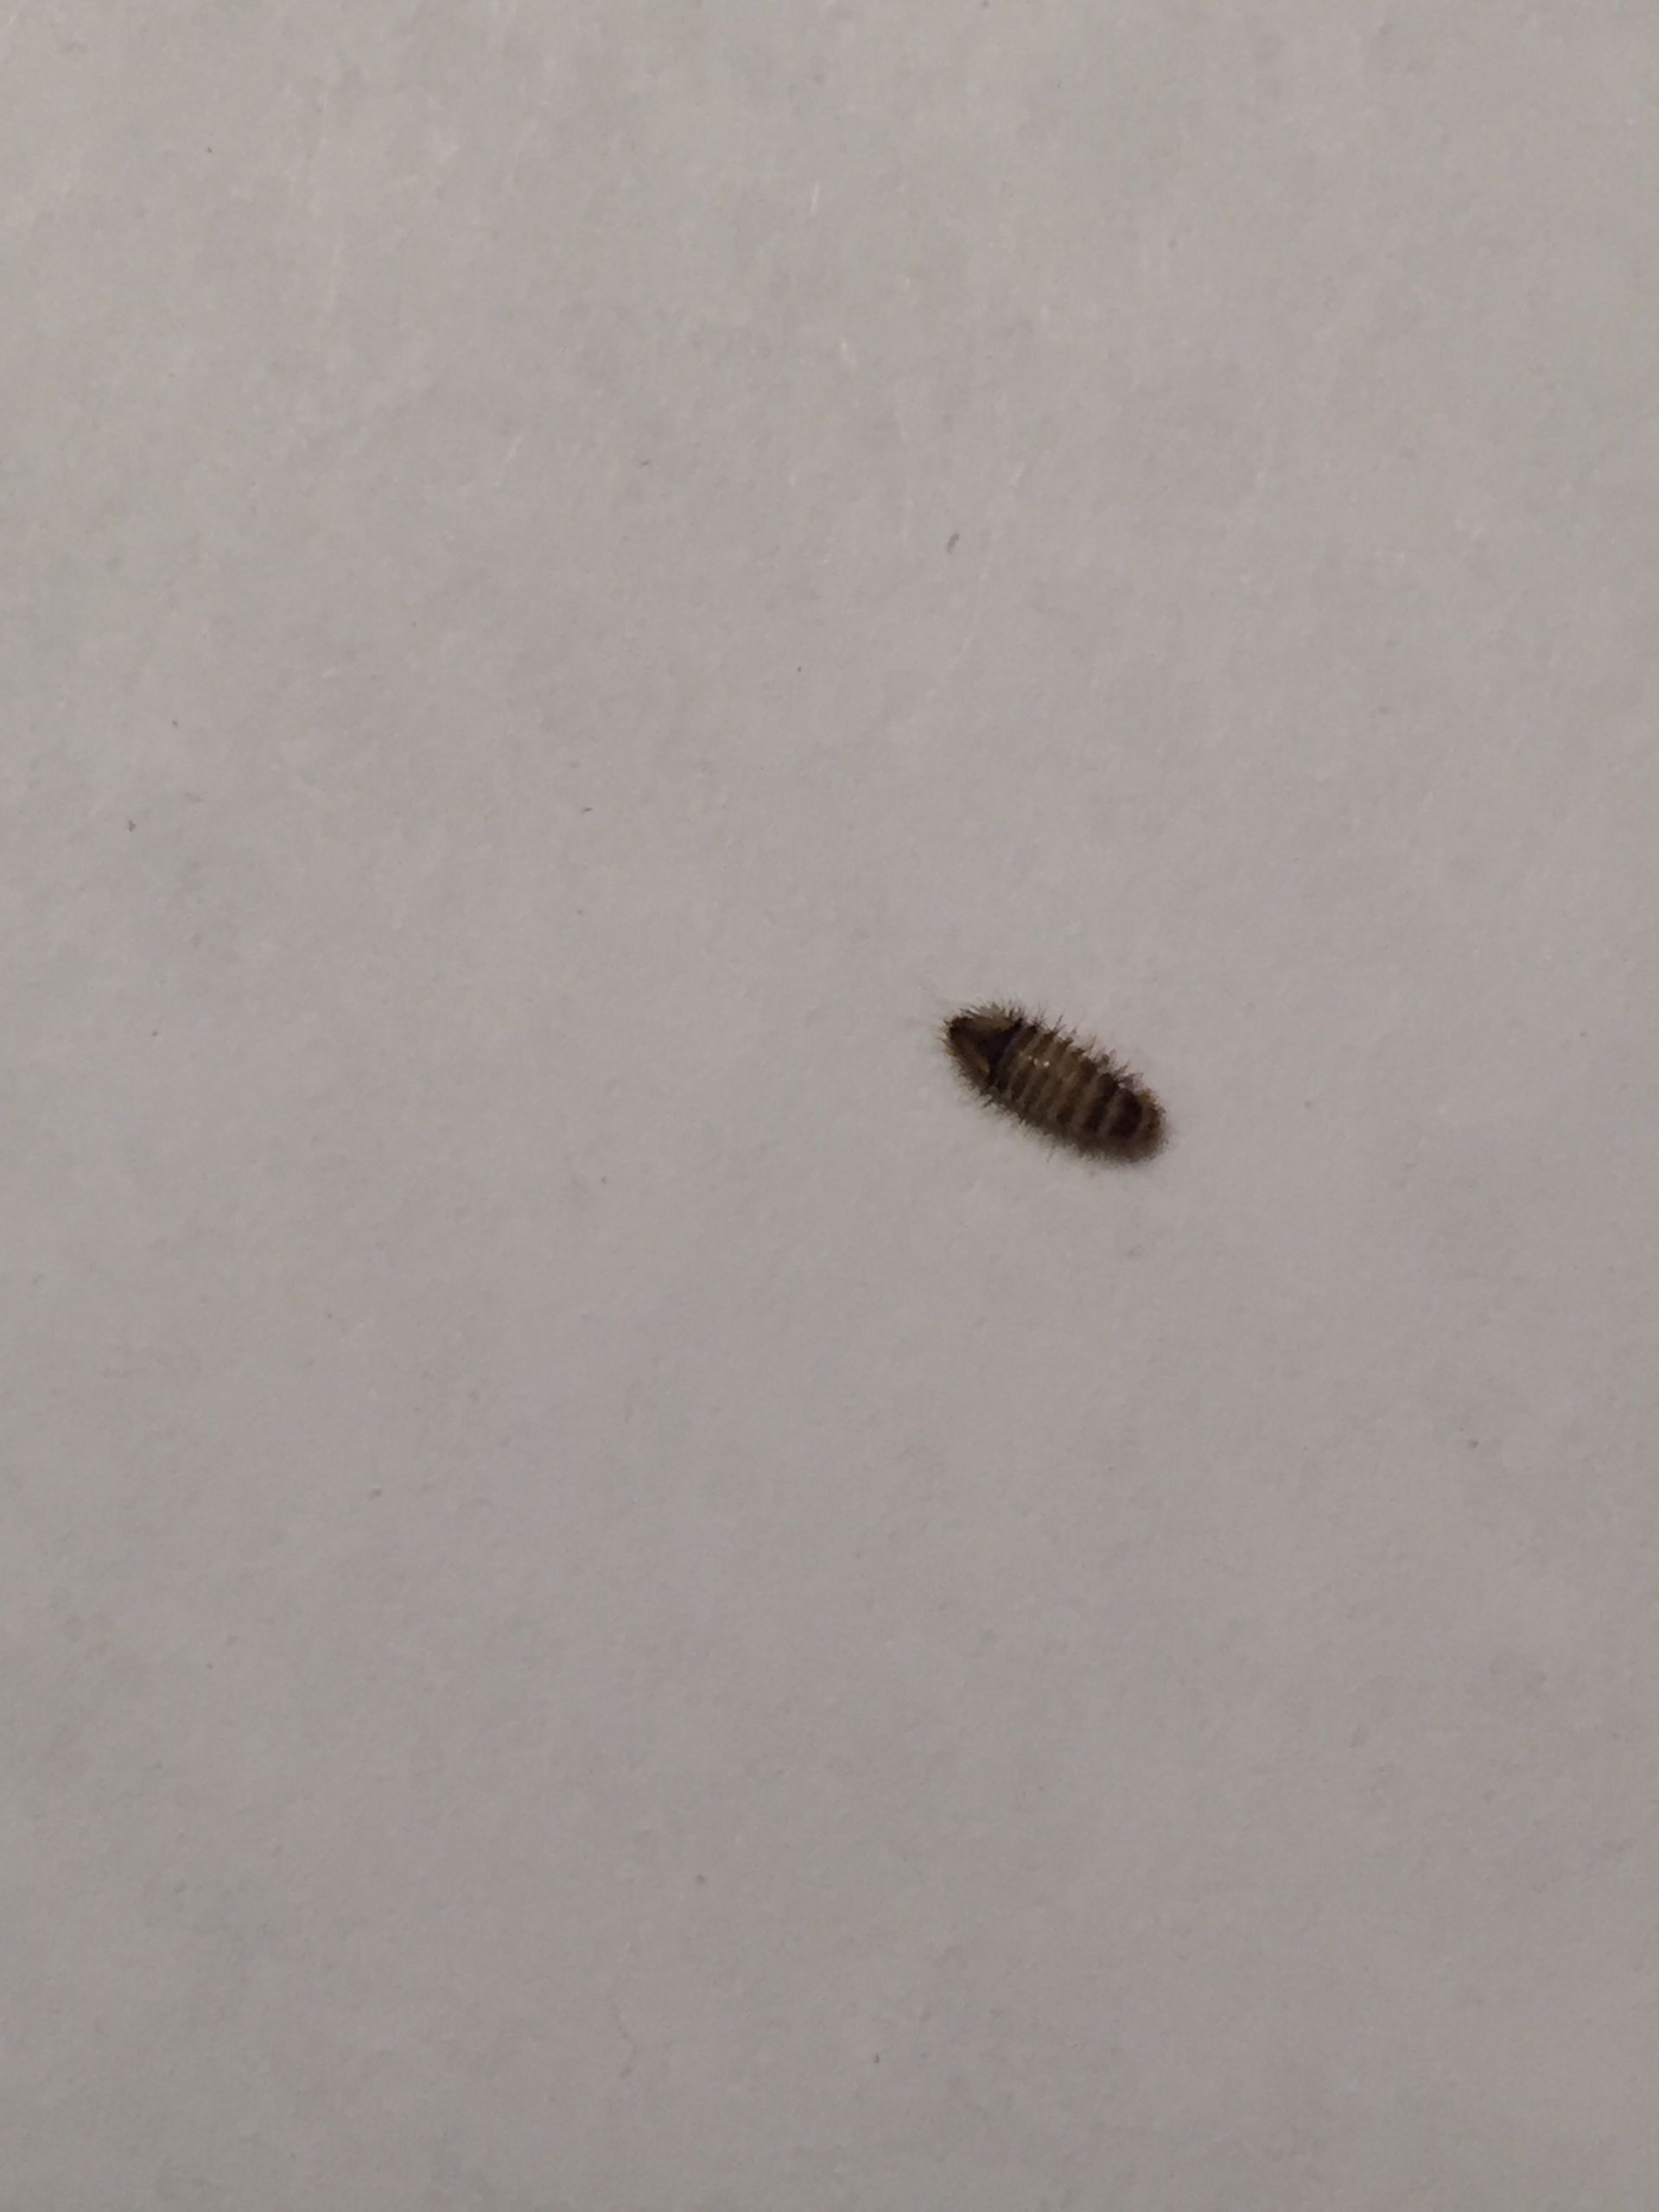 Small Bugs In Bathroom
 [Raleigh NC] Small bugs 5mm found in carpet under bed